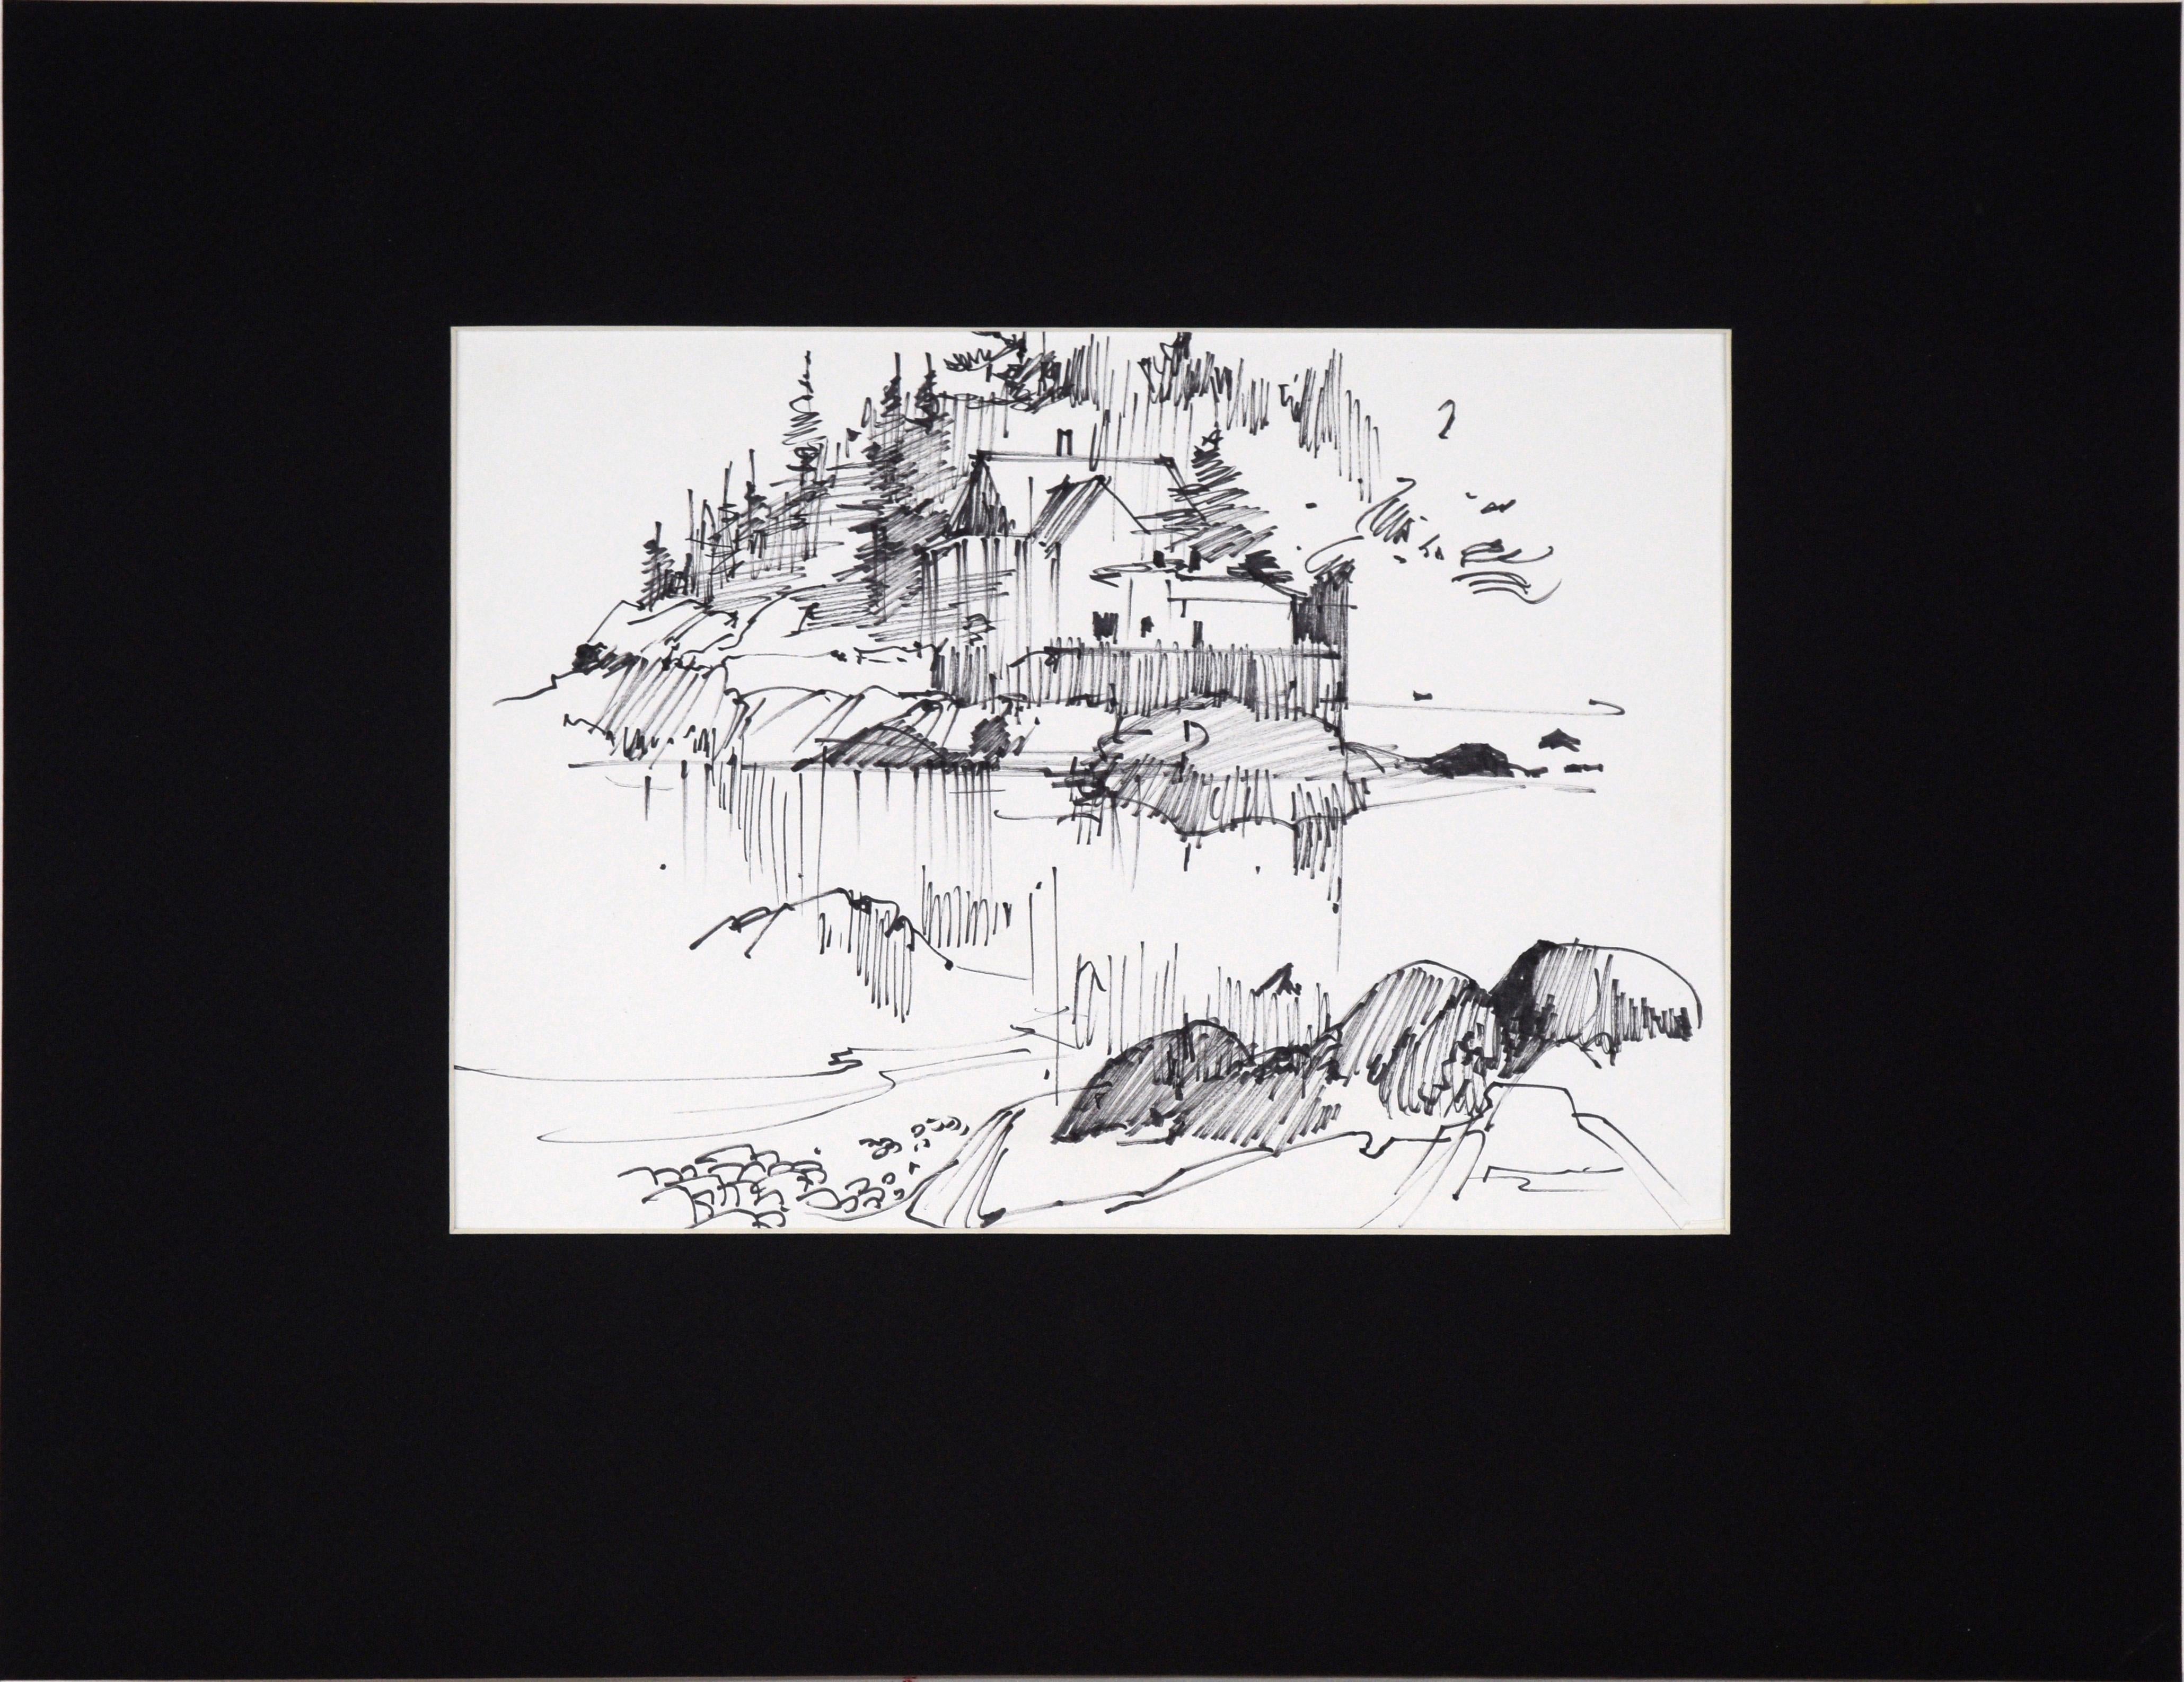 Laurence Sisson Landscape Art - House Across the Lake - Line Drawing Landscape in Ink on Paper